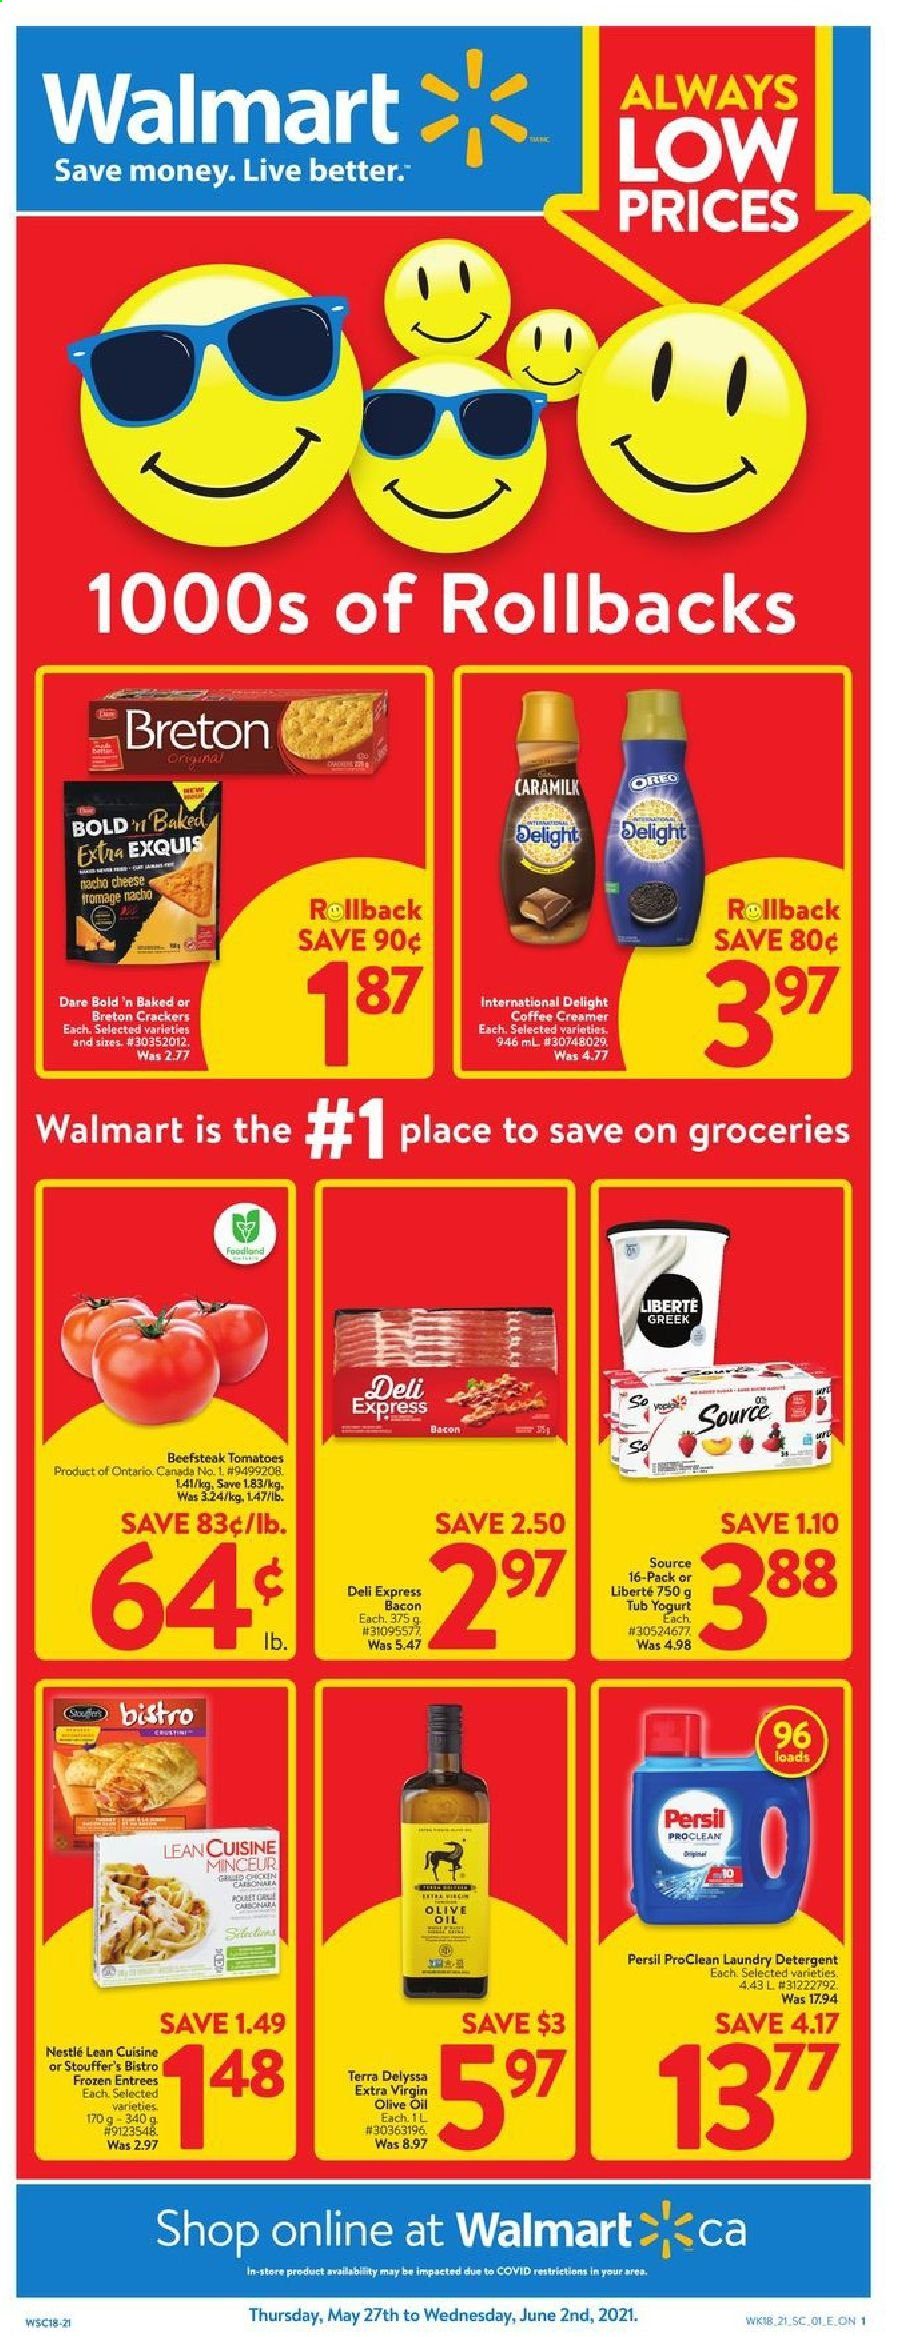 thumbnail - Walmart Flyer - May 27, 2021 - June 02, 2021 - Sales products - tomatoes, Lean Cuisine, bacon, cheese, Oreo, yoghurt, creamer, Stouffer's, crackers, extra virgin olive oil, olive oil, oil, Persil, laundry detergent, Nestlé. Page 1.